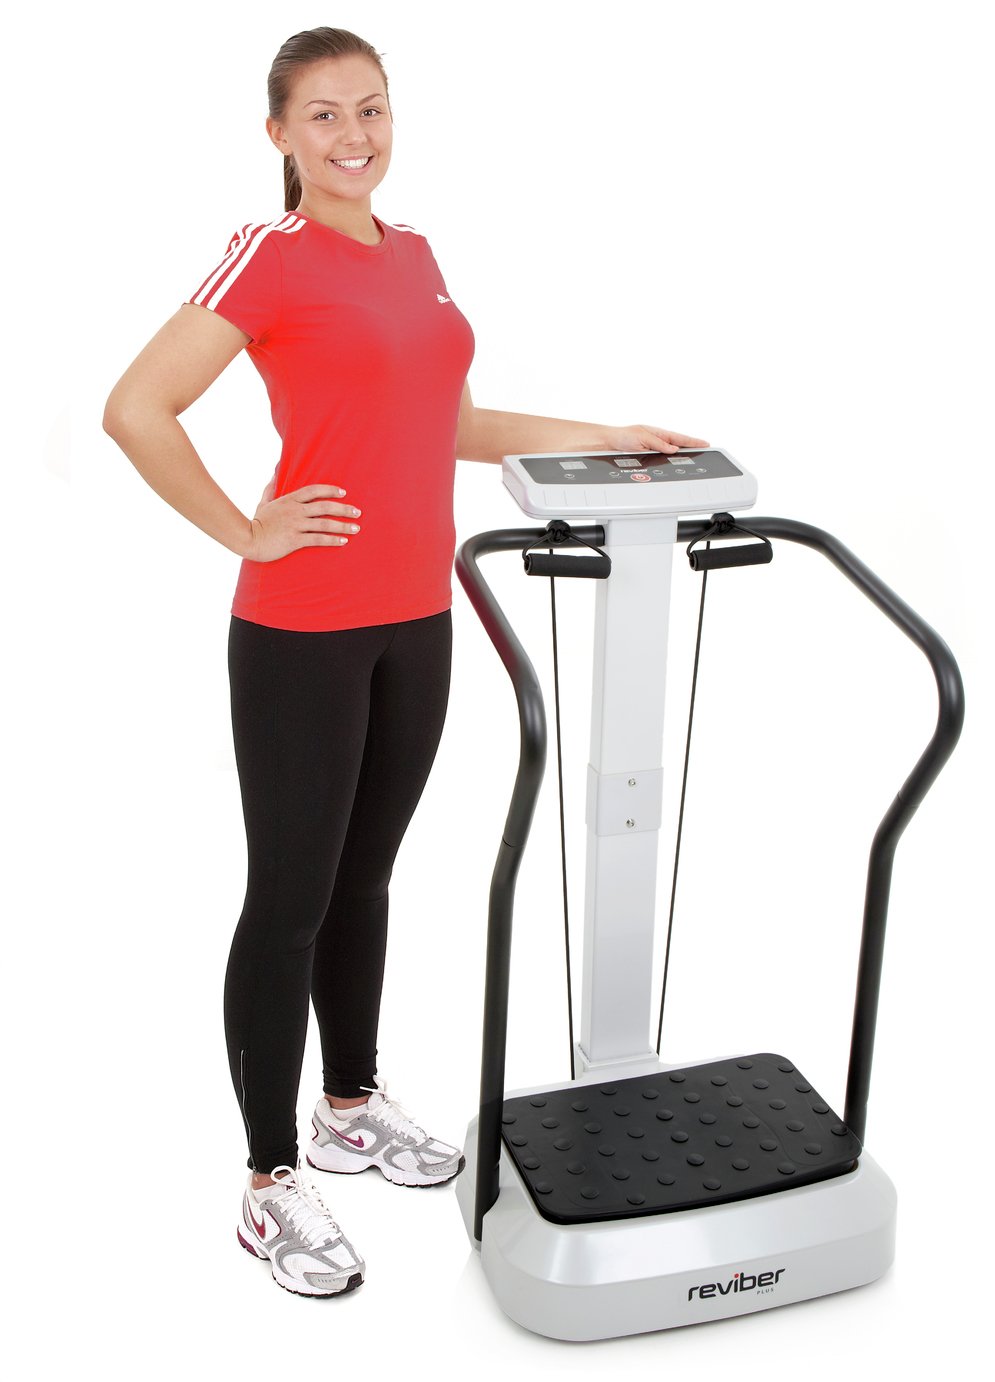 Reviber Plus Vibration Plate Exercise Machine With Stand review